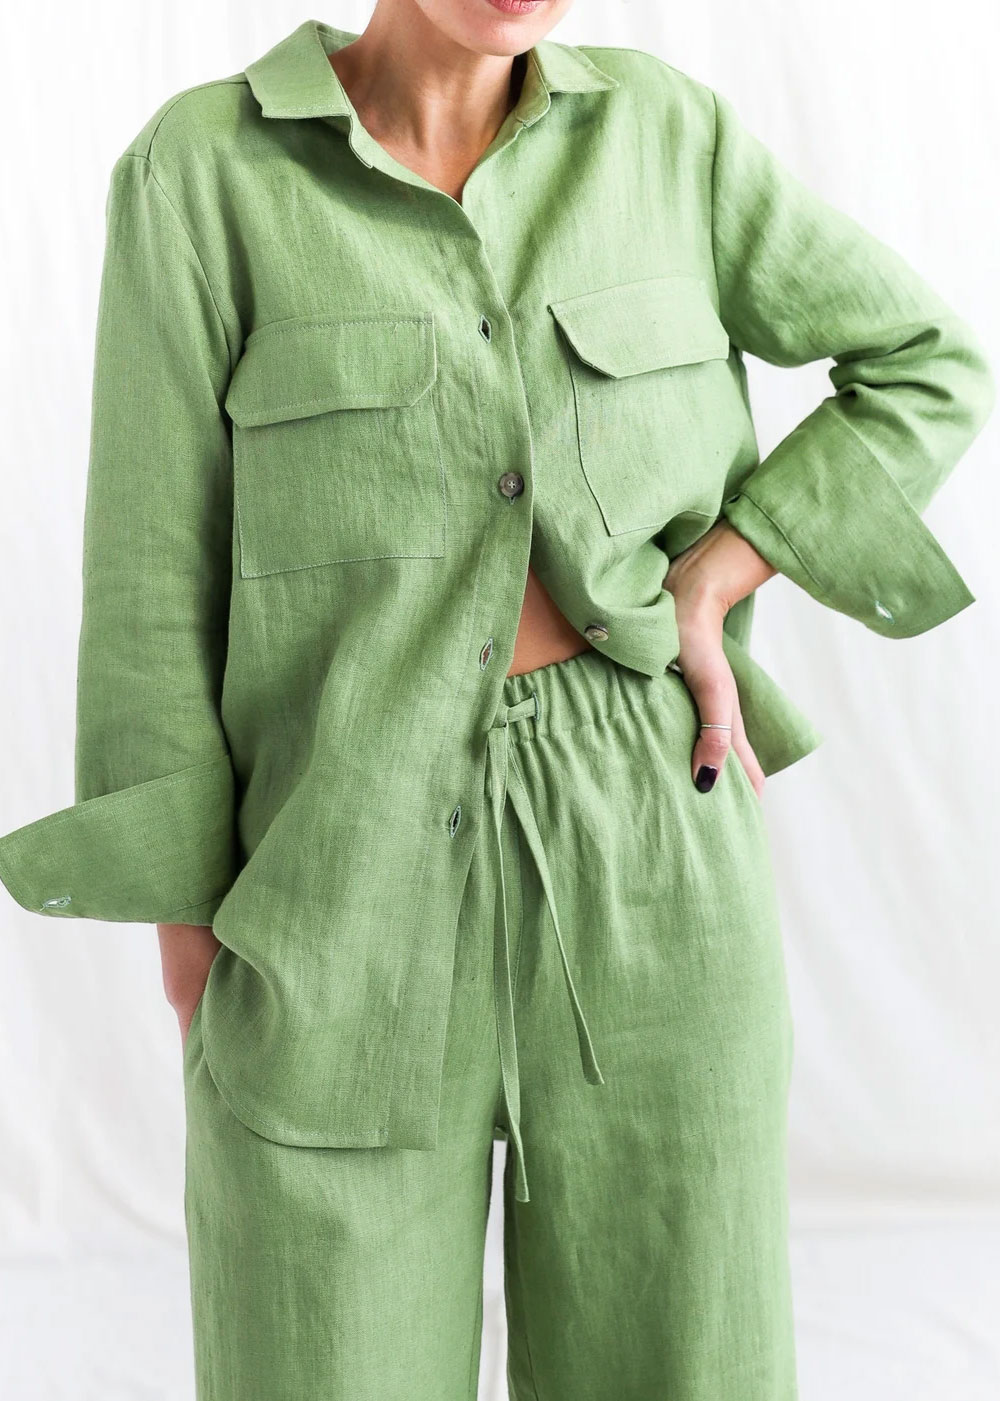 Two Piece Sets for Spring - Sustainable Co-ord Sets via eco club